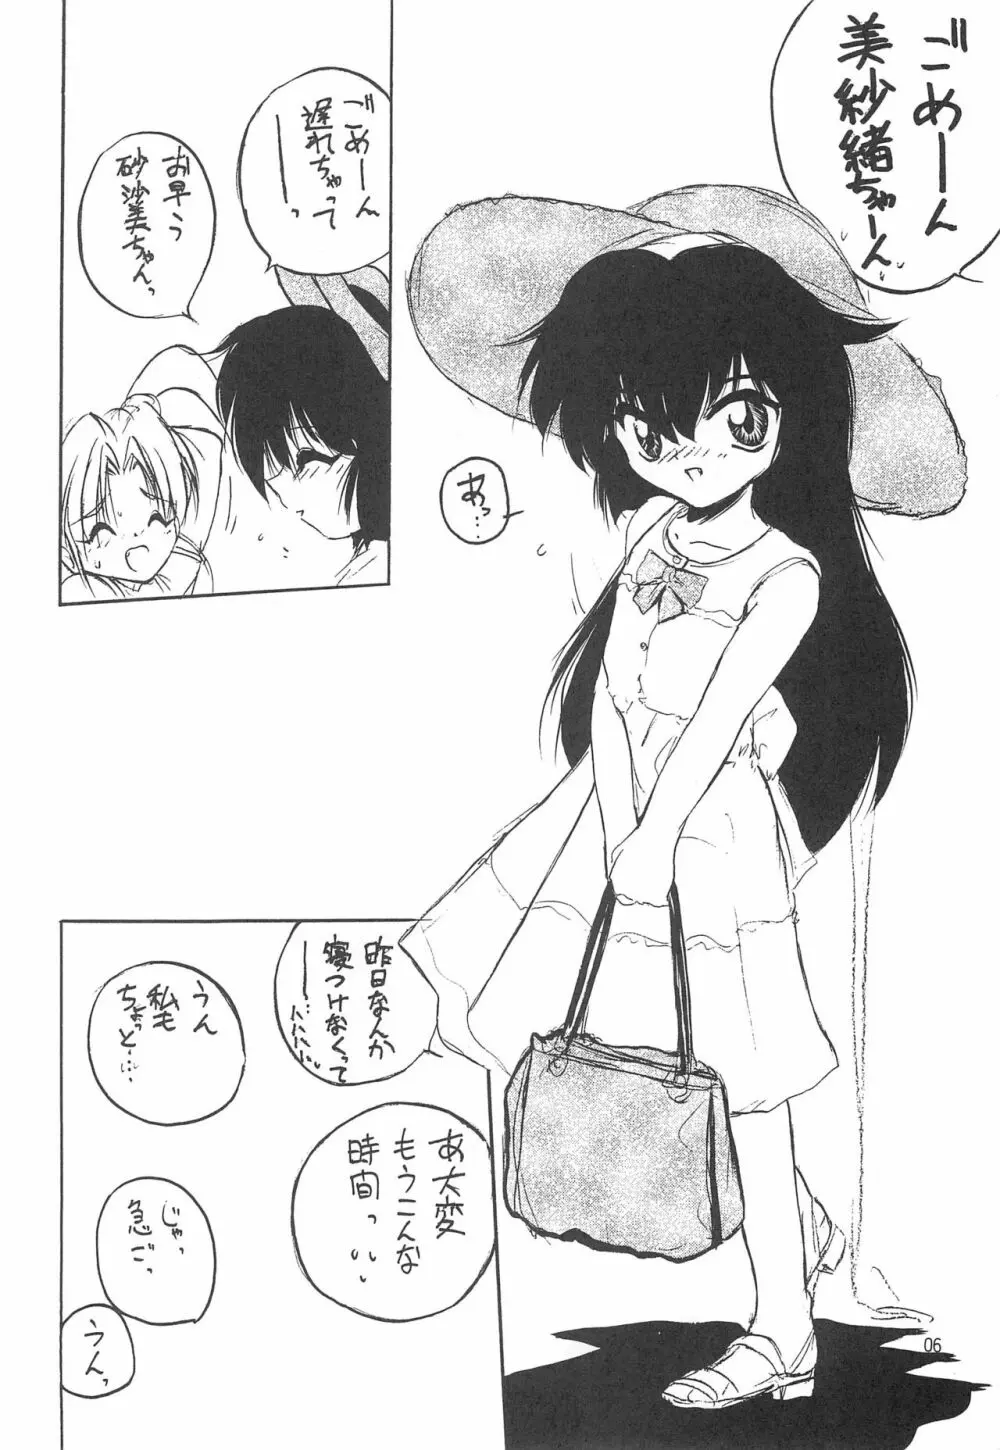 With Page.6